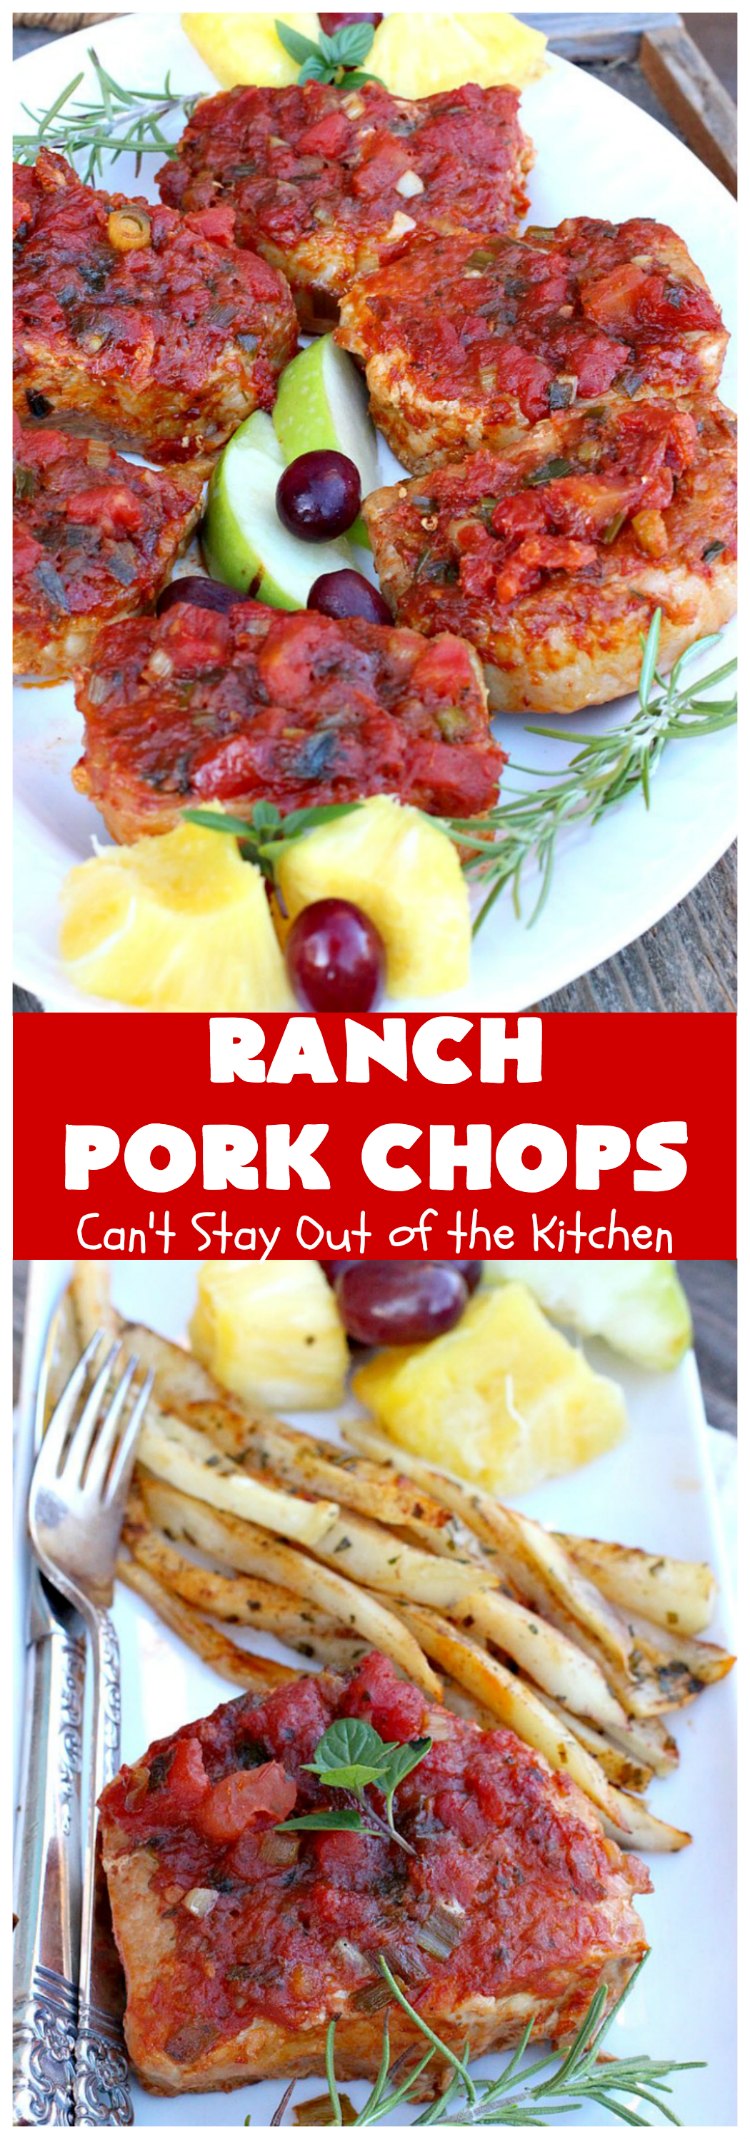 Ranch Pork Chops | Can't Stay Out of the Kitchen